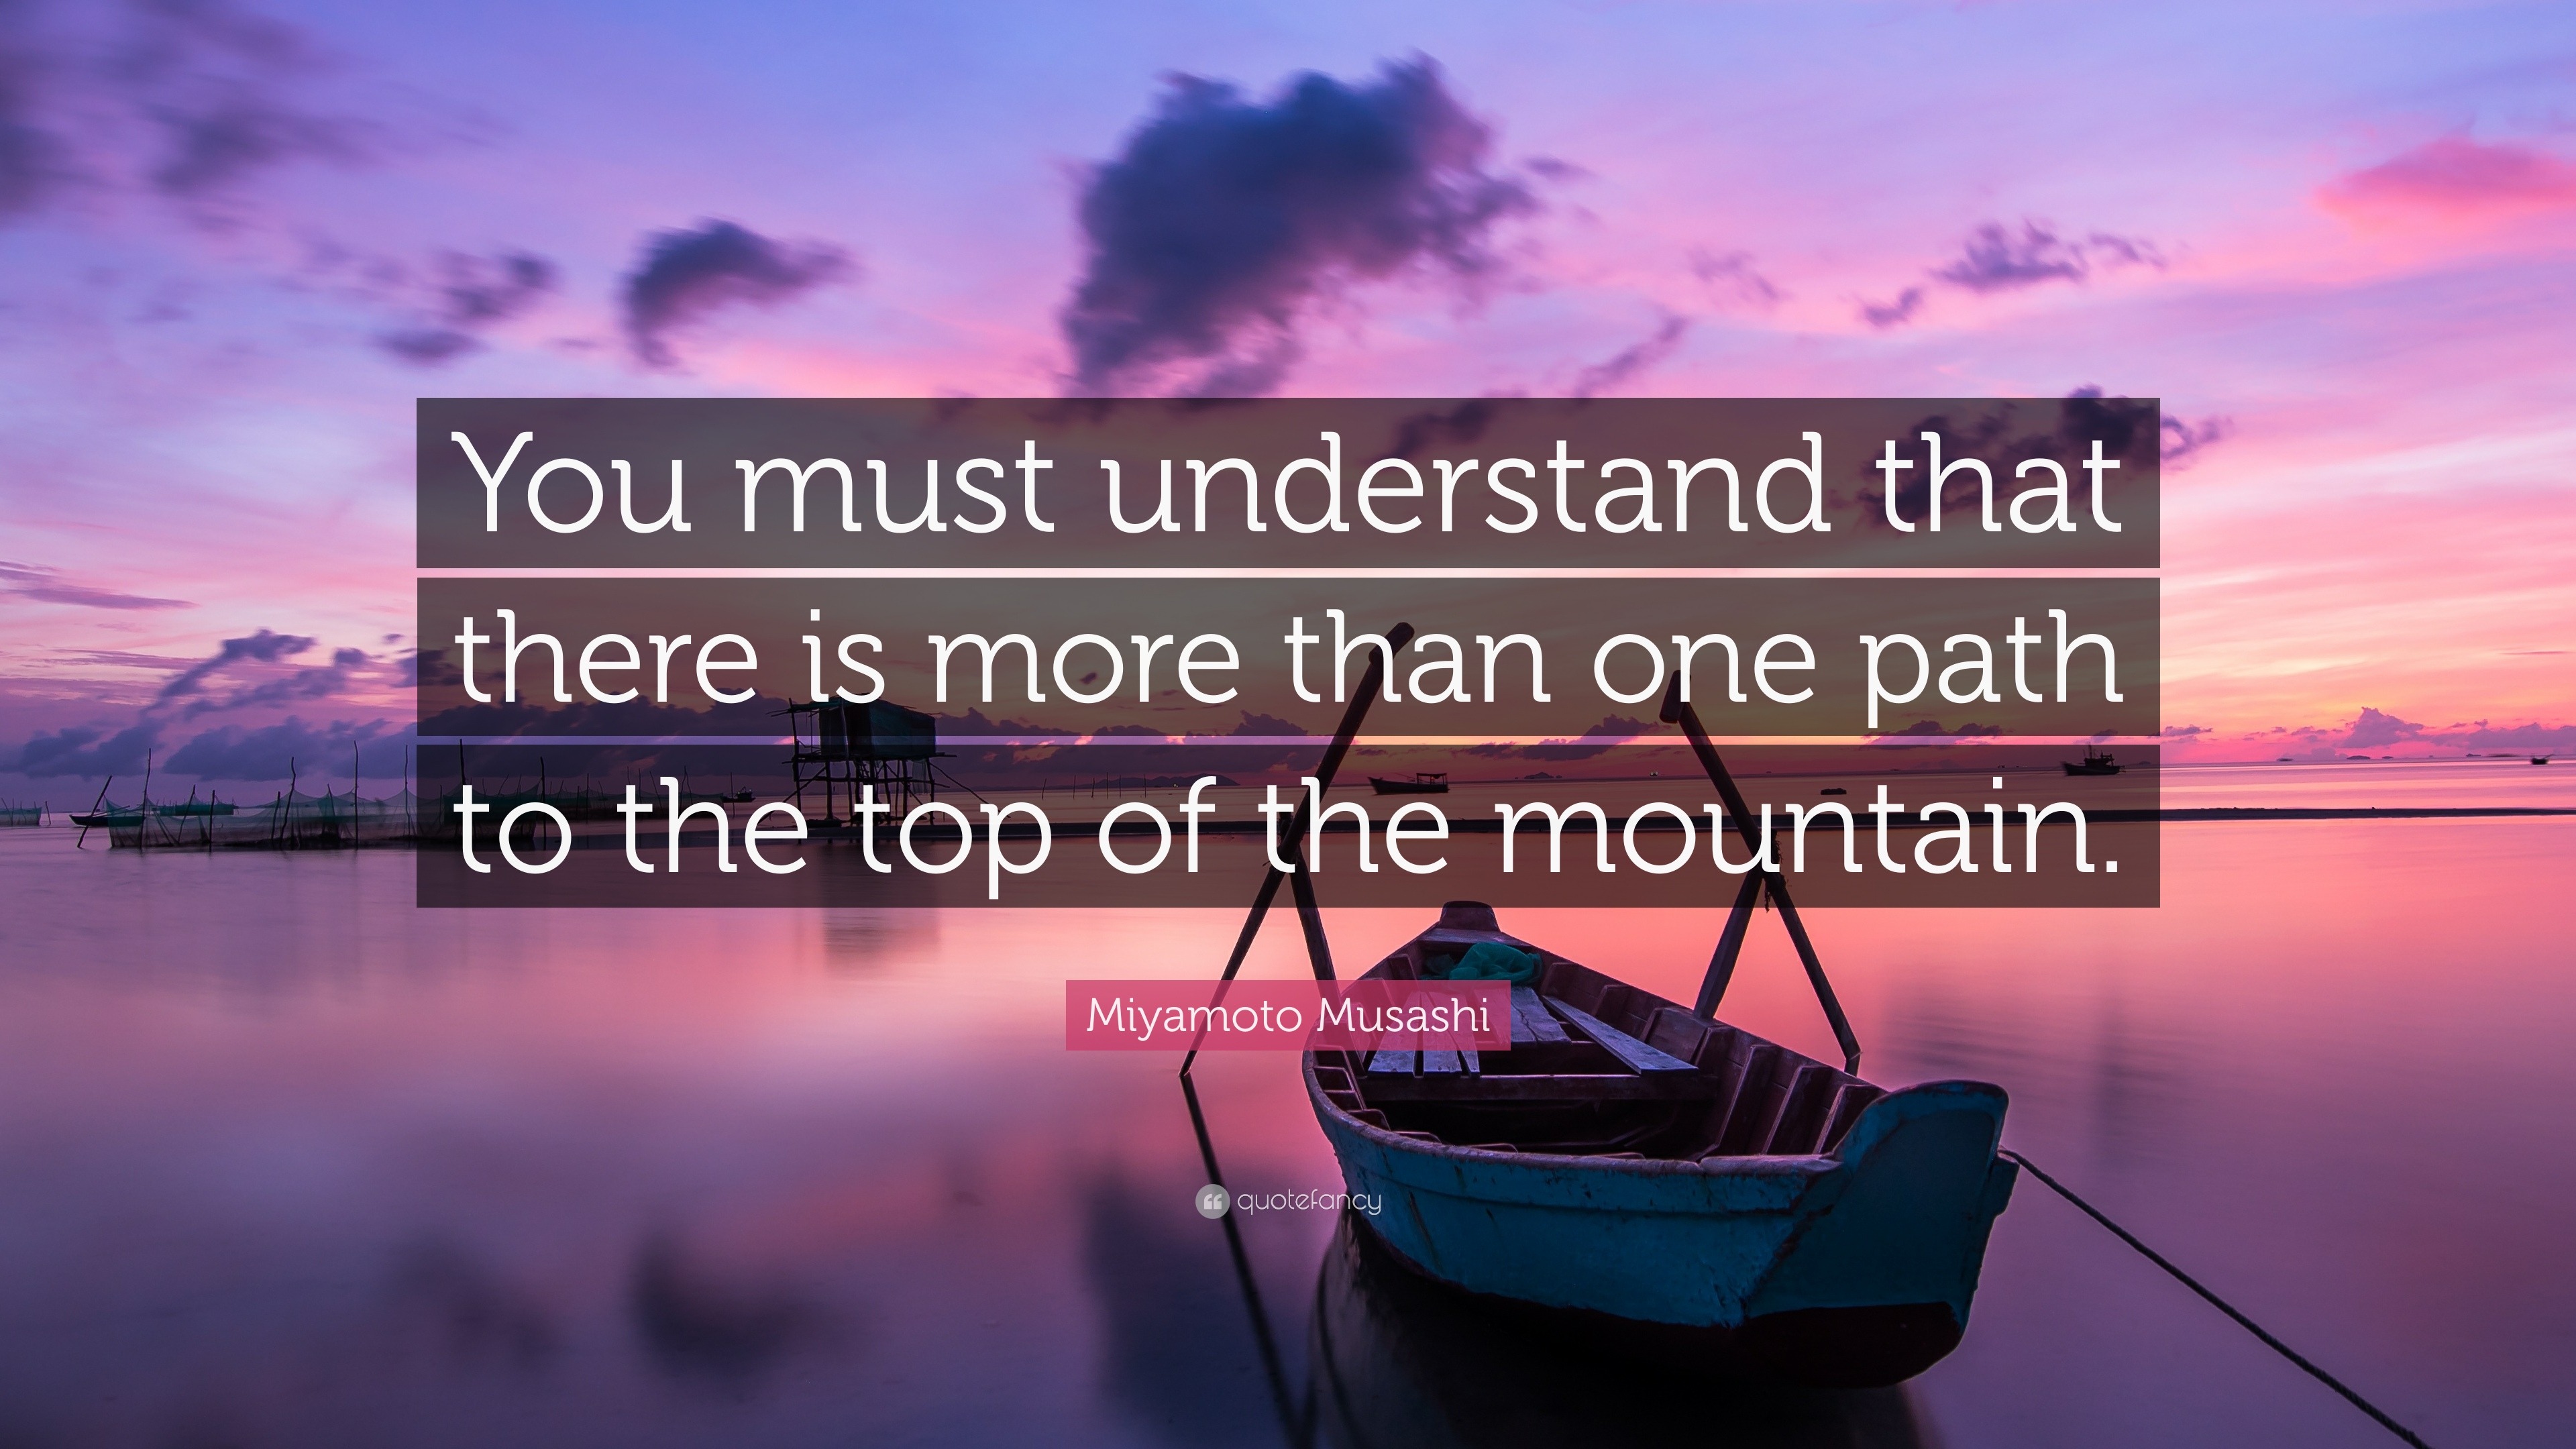 Miyamoto Musashi Quote: “You must understand that there is more than ...